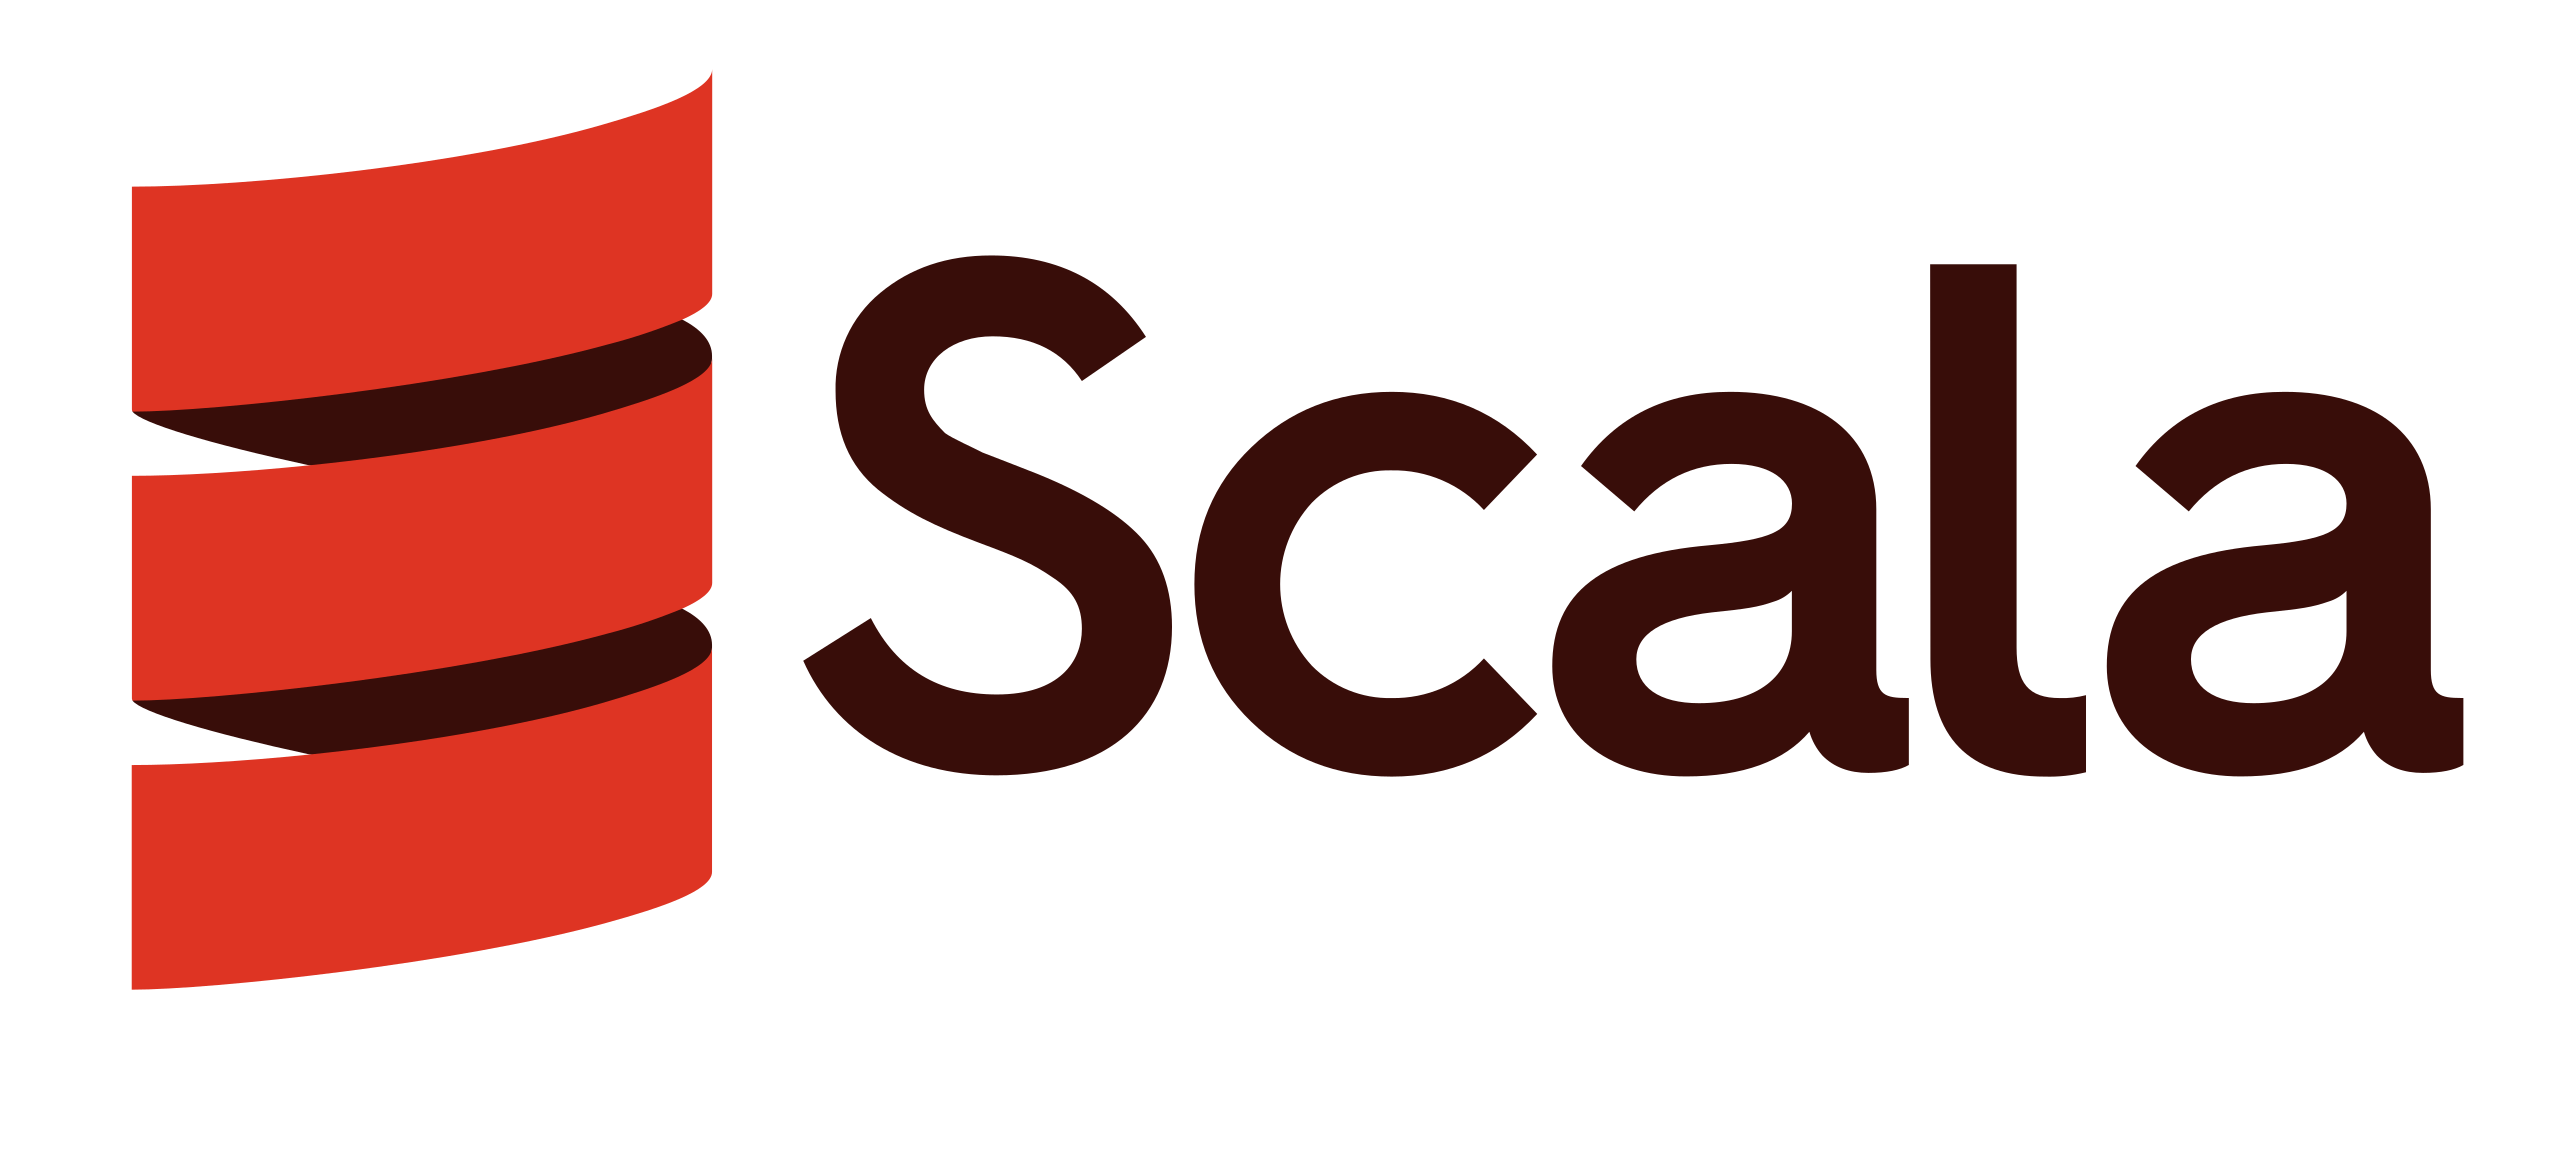 2560px-Scala-full-color.svg